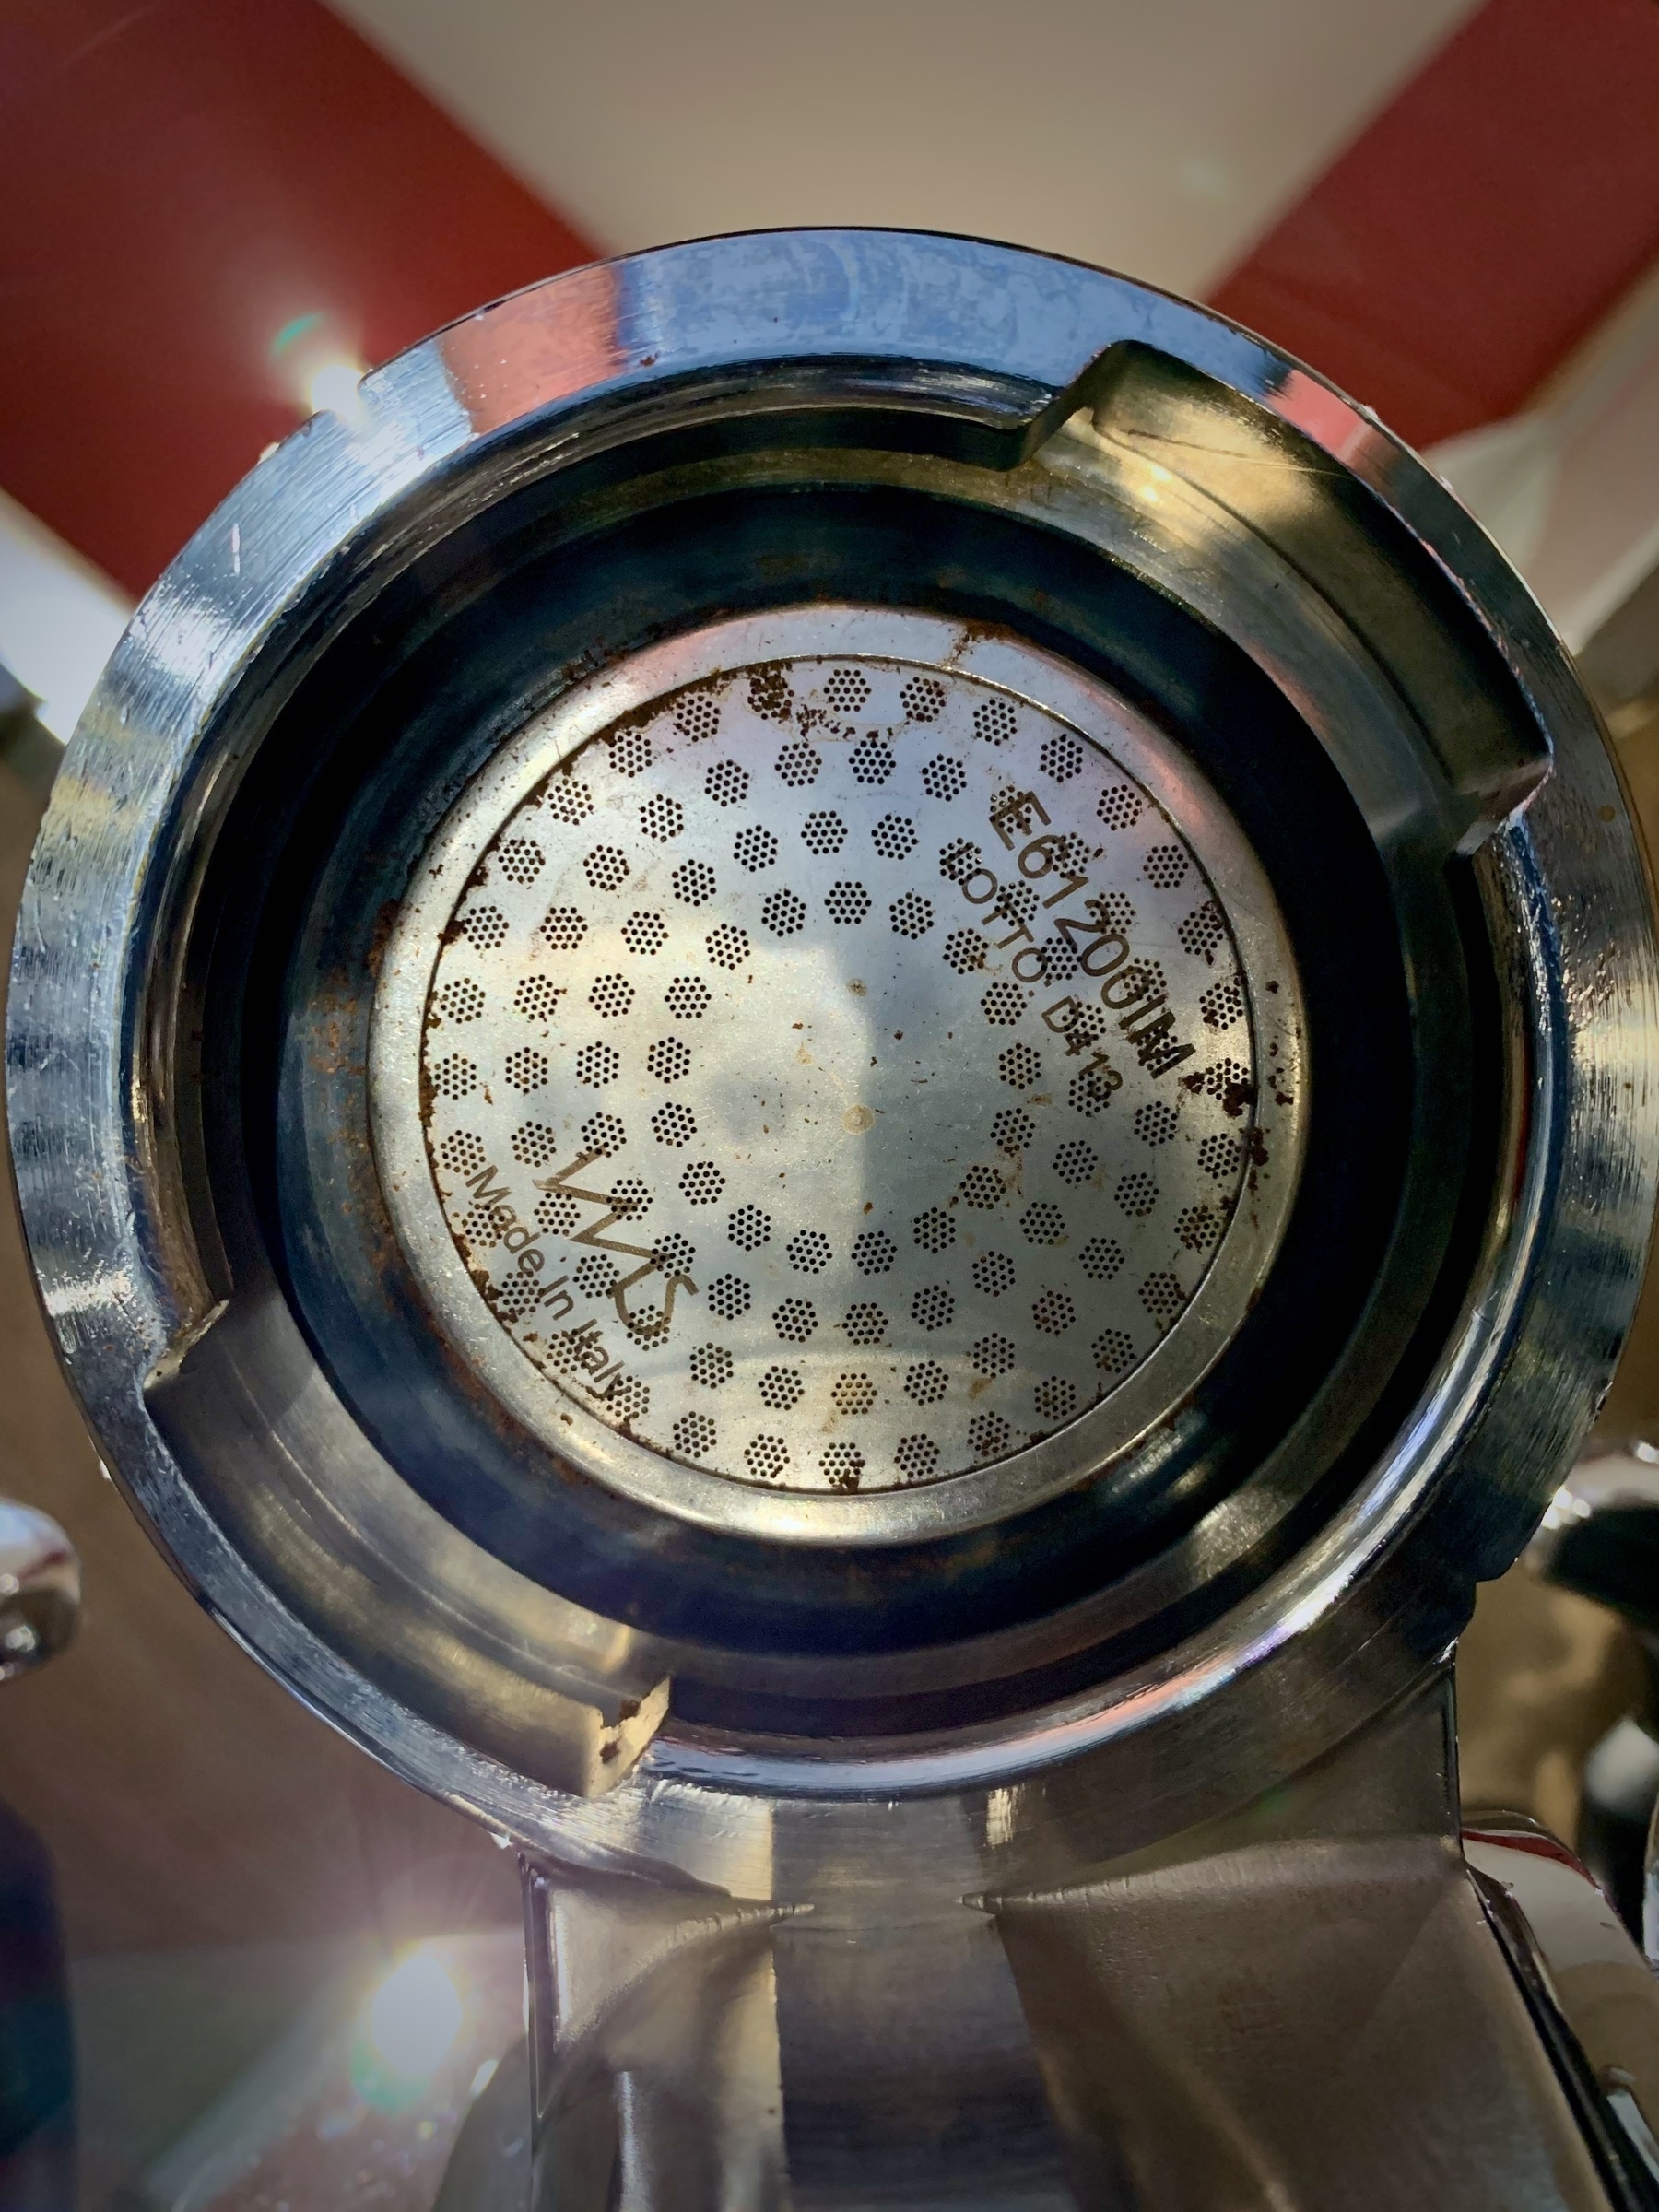 The underside of a E61 style group head, showing coffee grinds stuck to the shower screen and gasket.